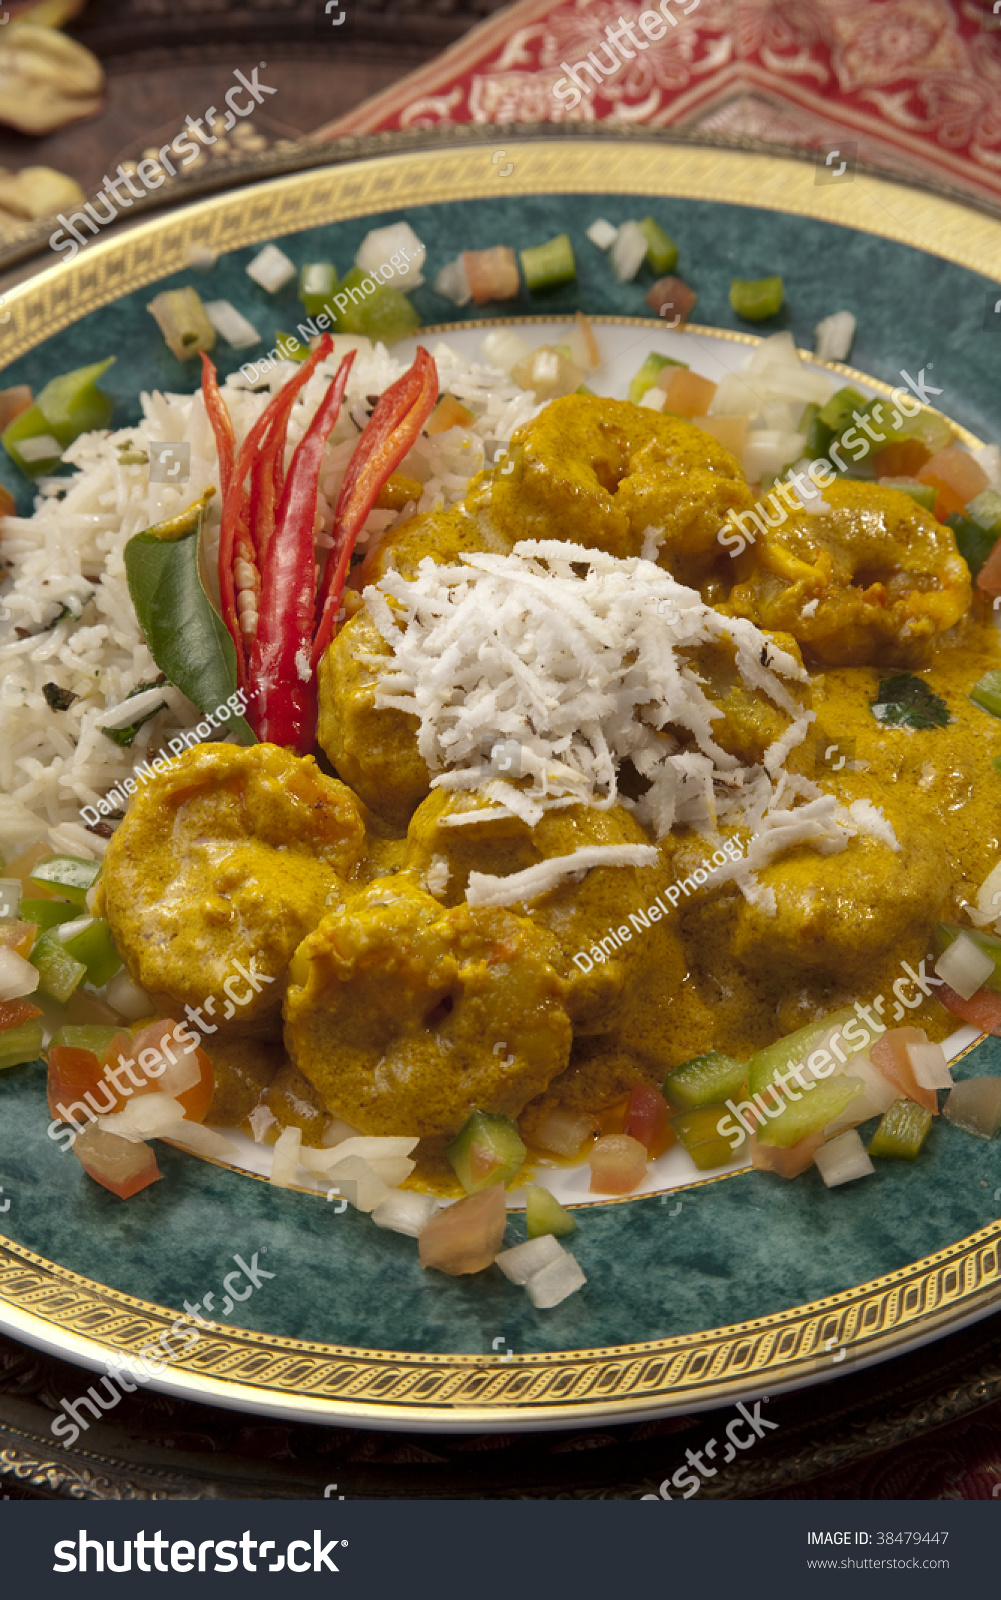 North Indian Chicken Curry In Yogurt On Rice Stock Photo 38479447 ...